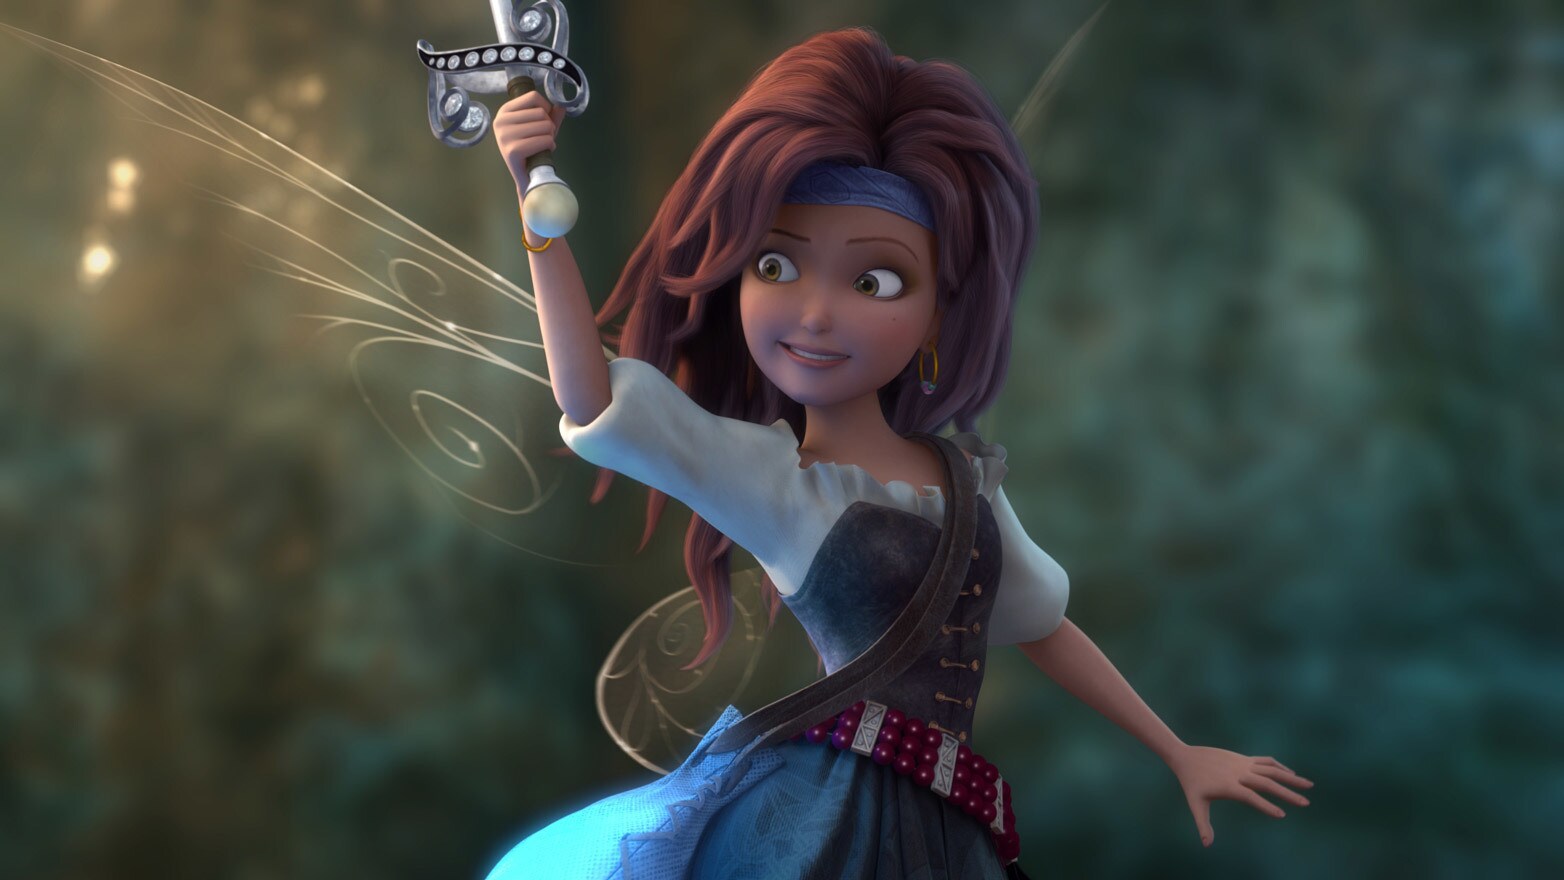 Zarina flies away to join forces with the pirates of Skull Rock.